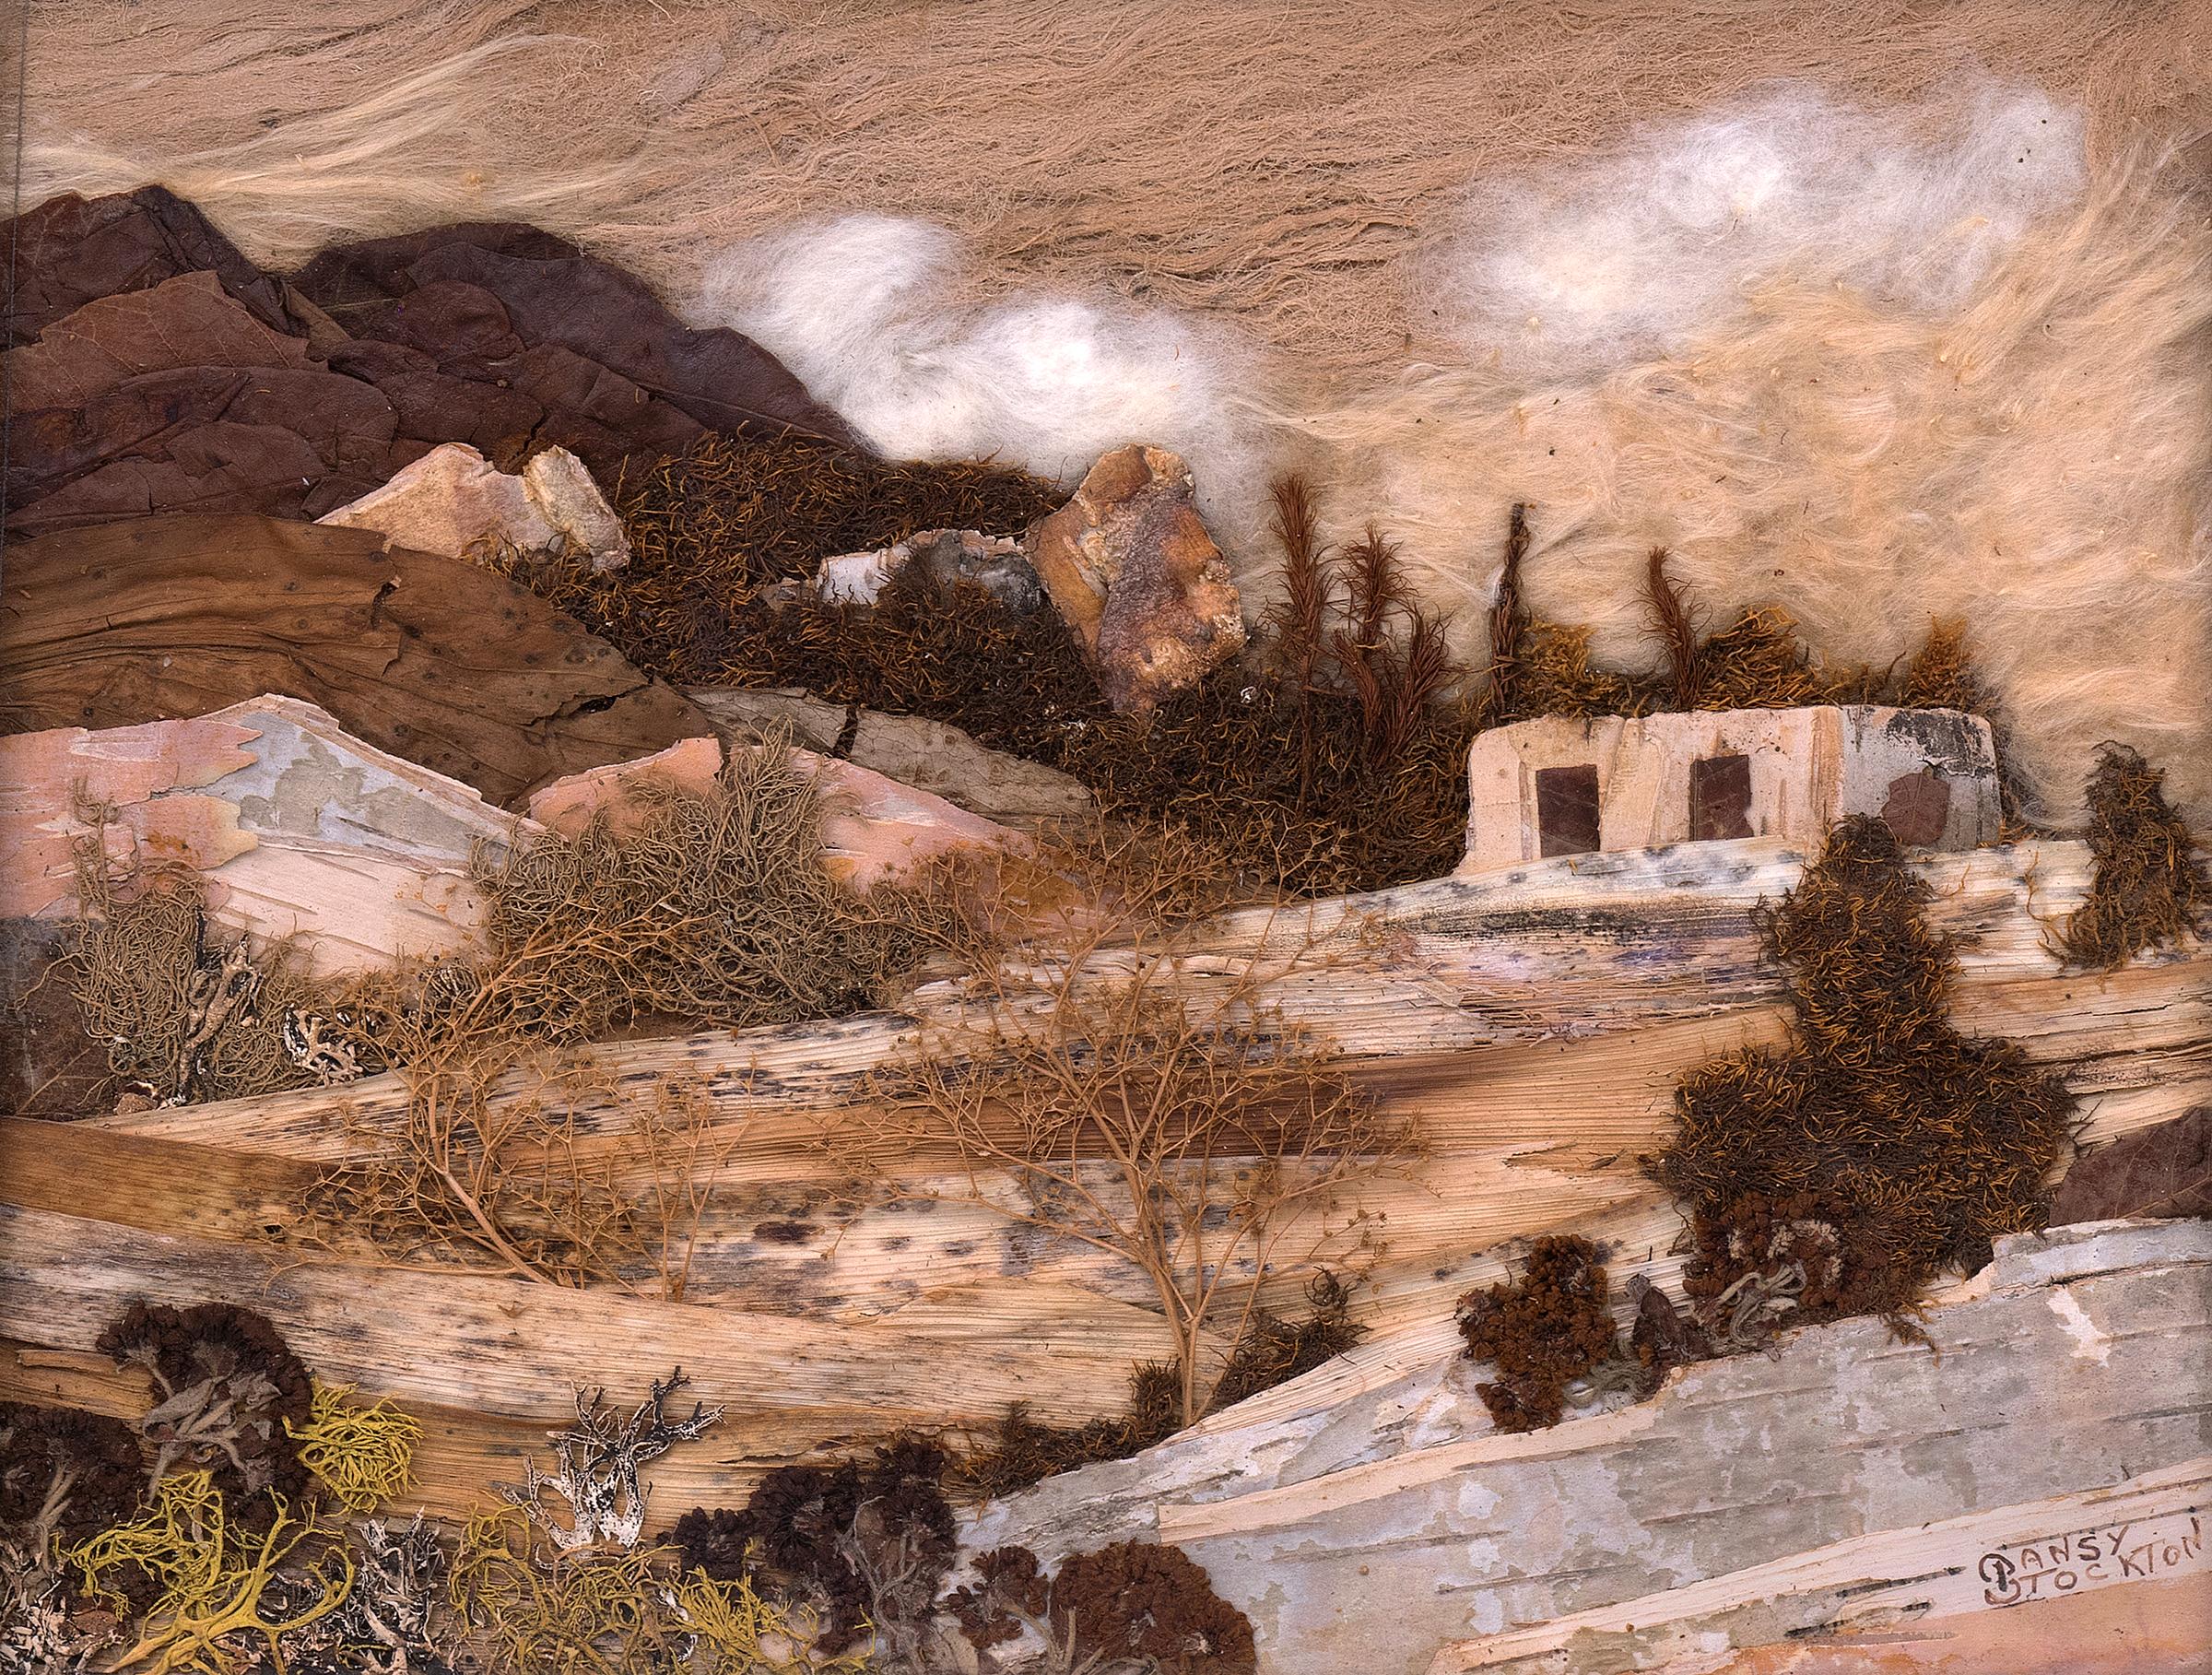 Hillside, New Mexico, Landscape with Adobe, Botanical Mixed Media Assemblage - Painting by Pansy Stockton